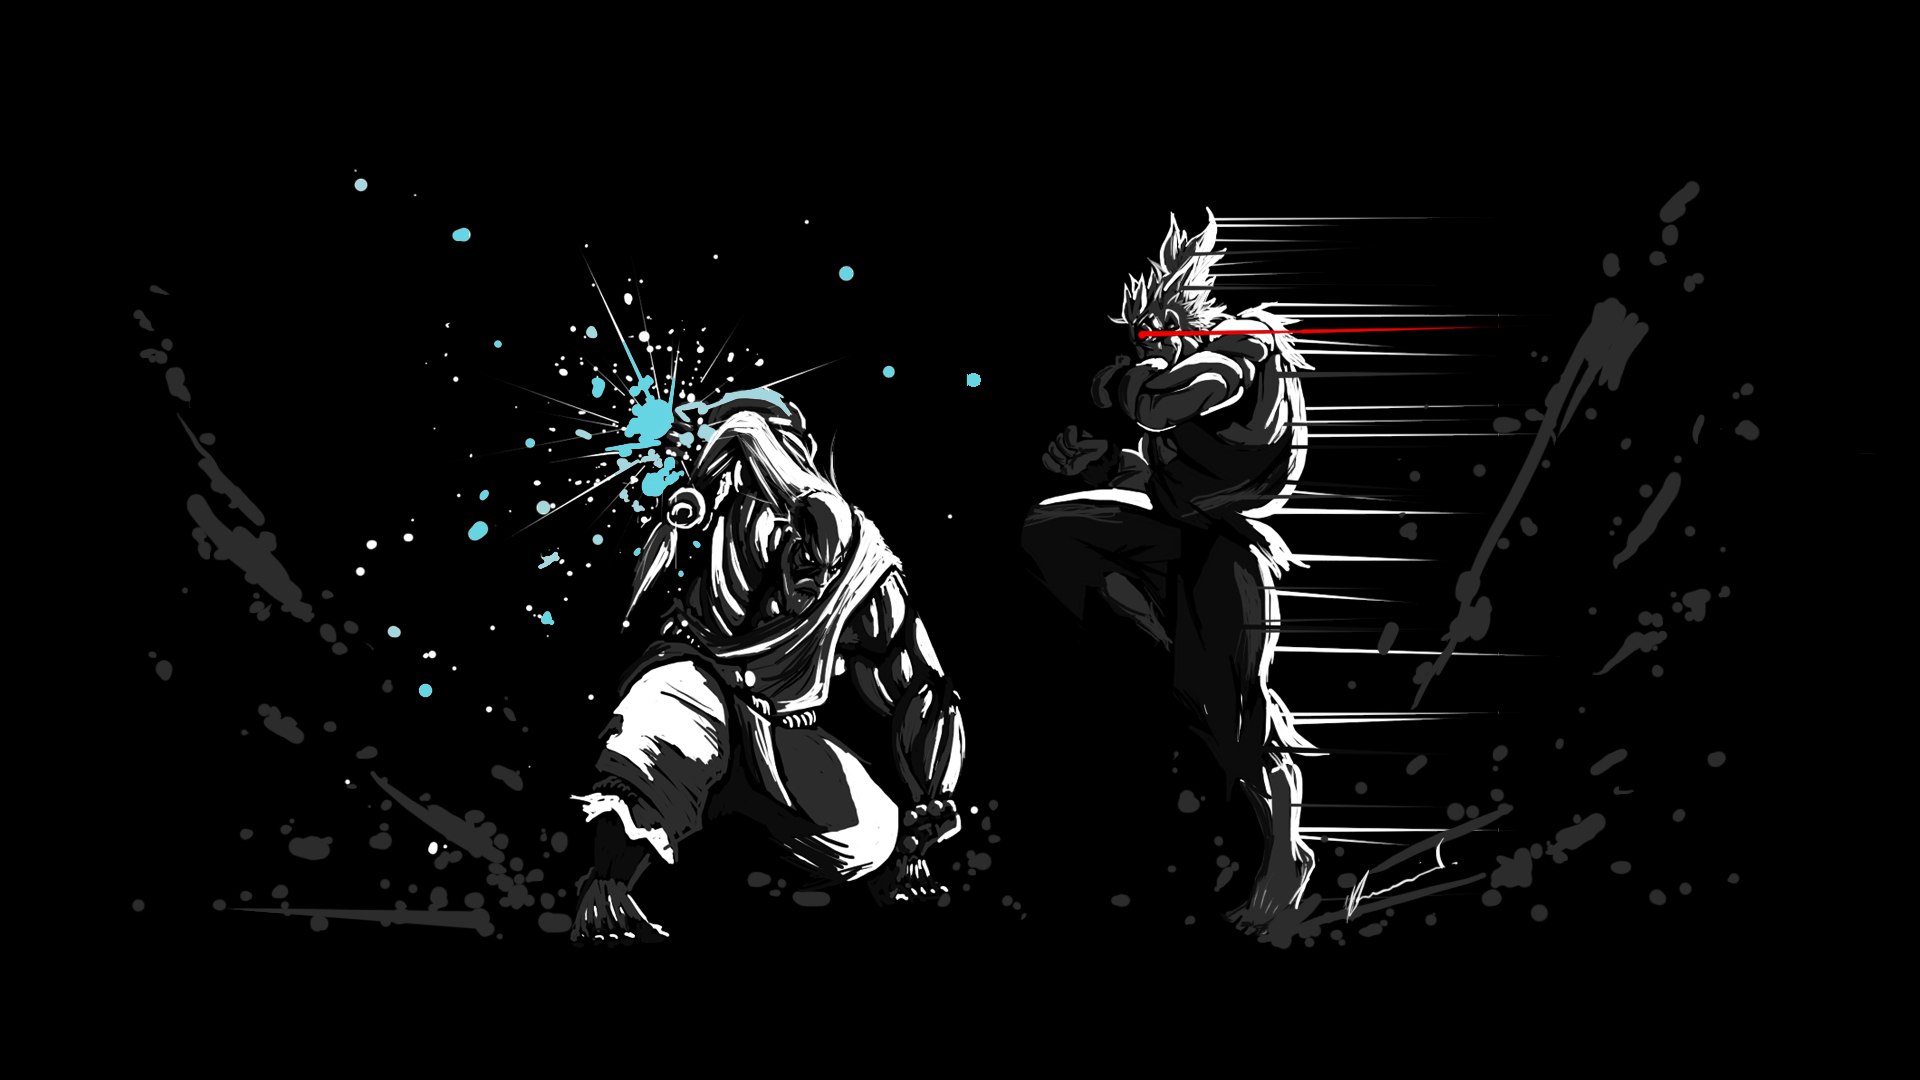 Street fighter wallpaper 1920x1080 - - High Quality and other